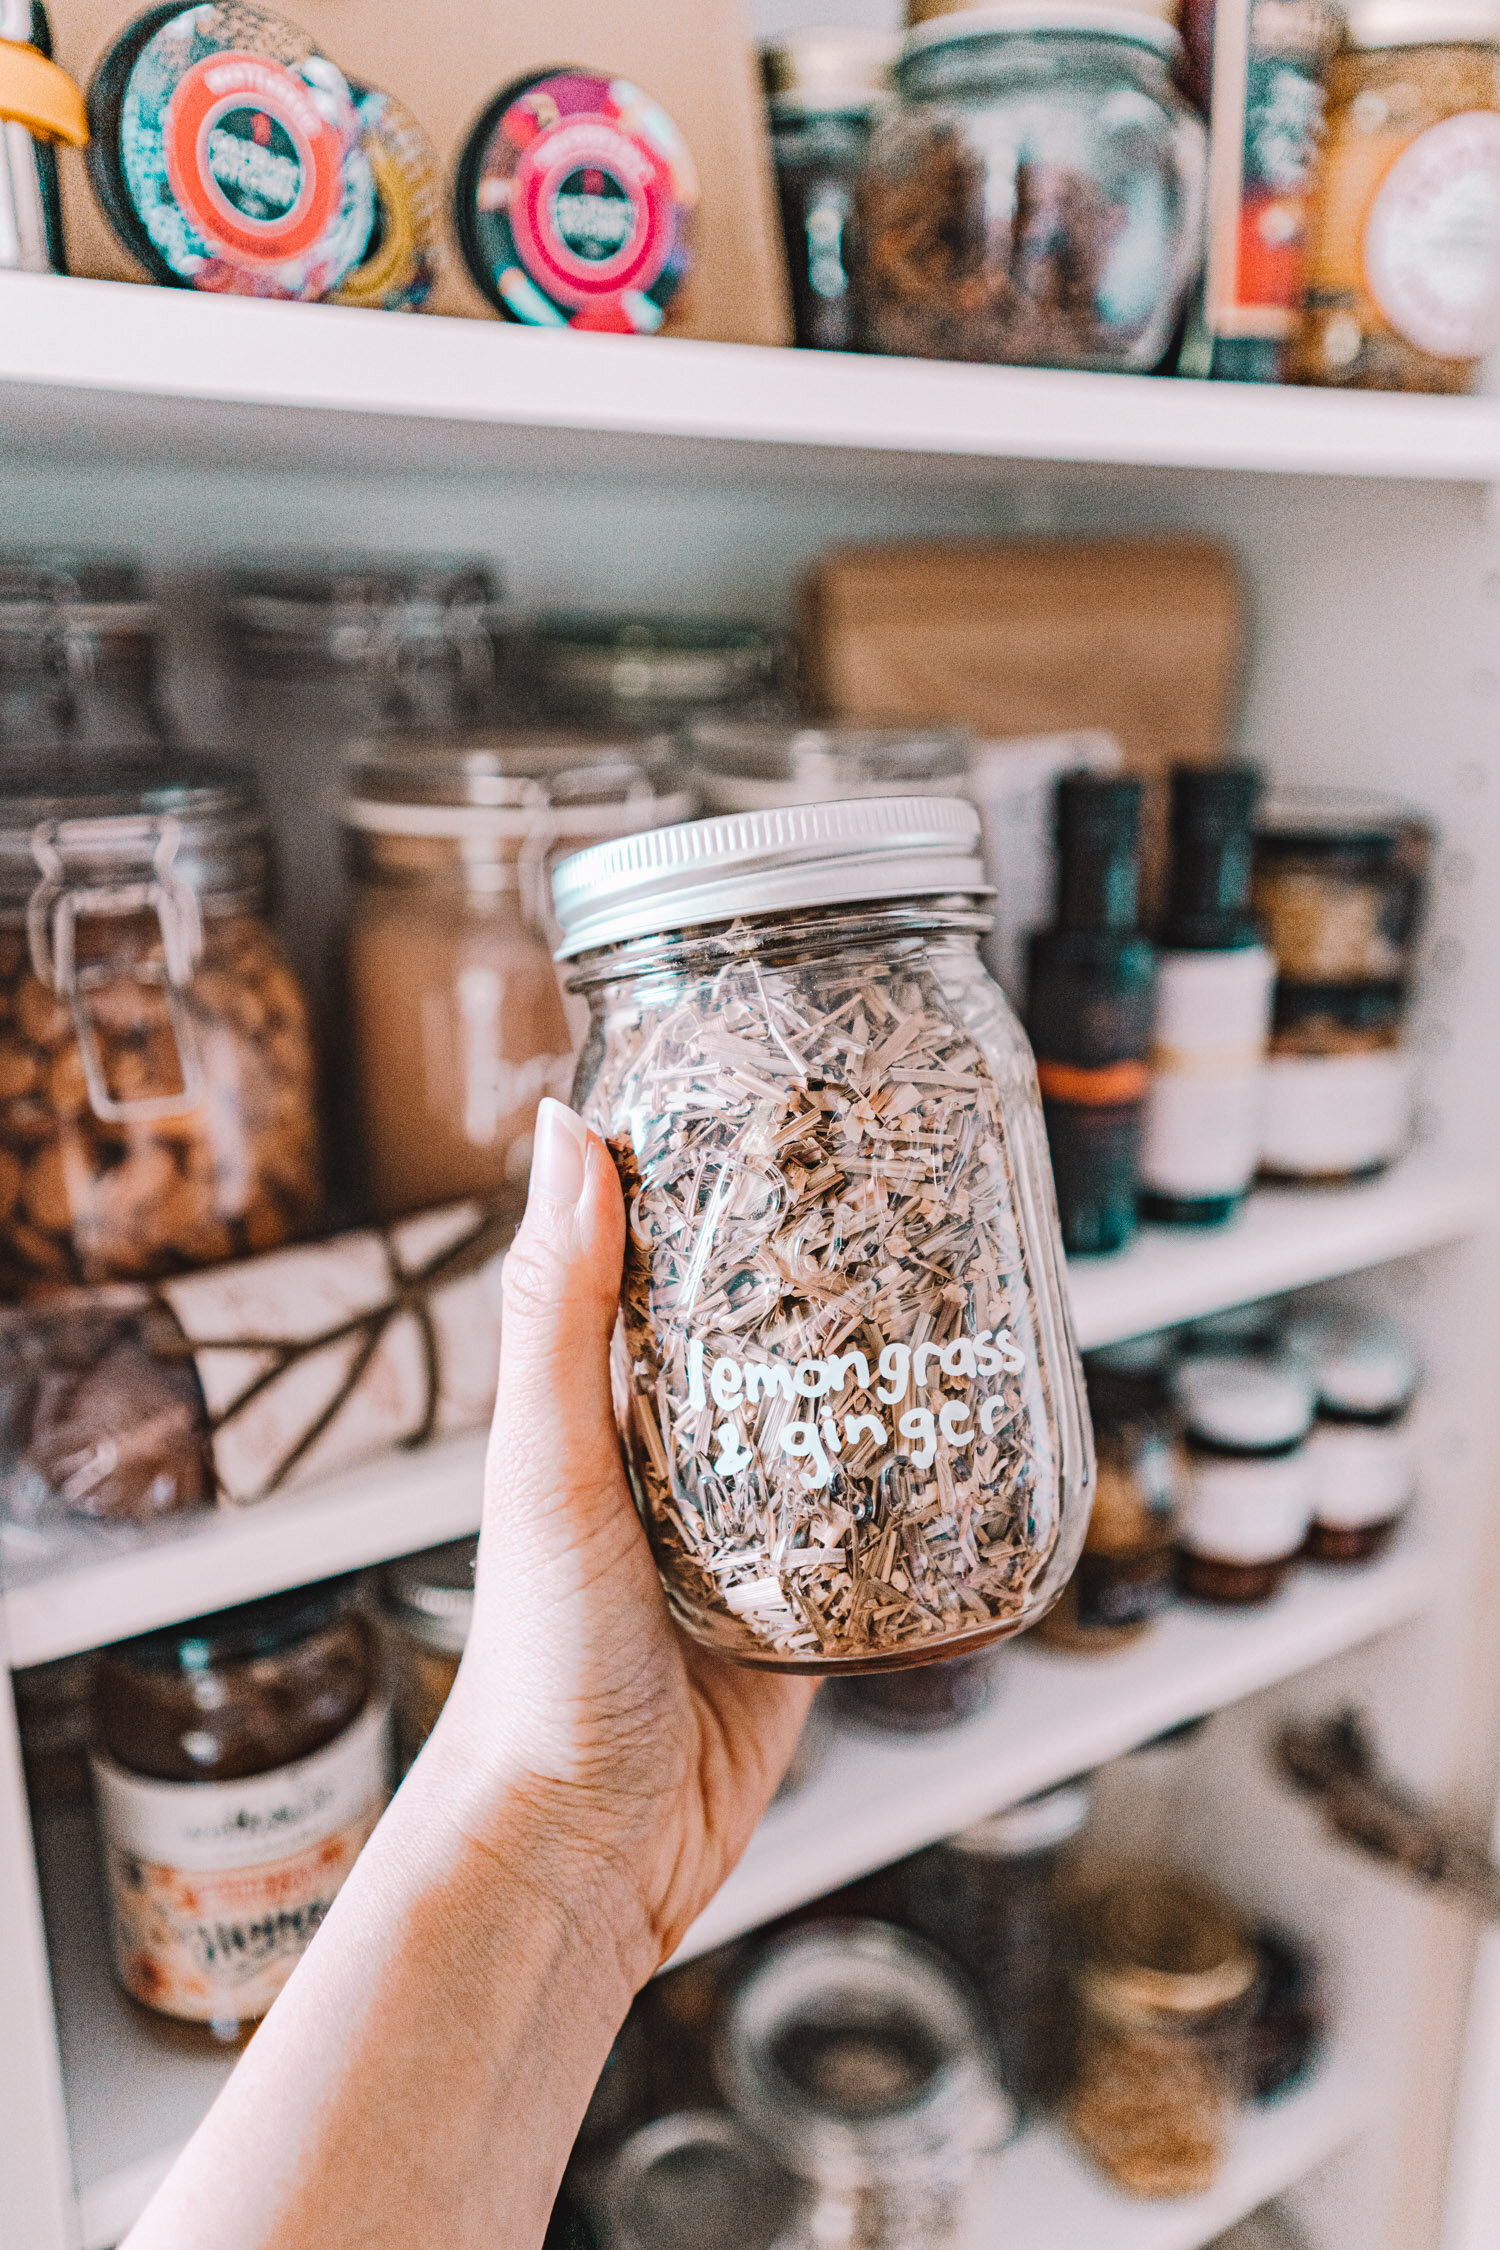 How to Recycle - Reuse Glass Jars, DIY Pantry Organisation